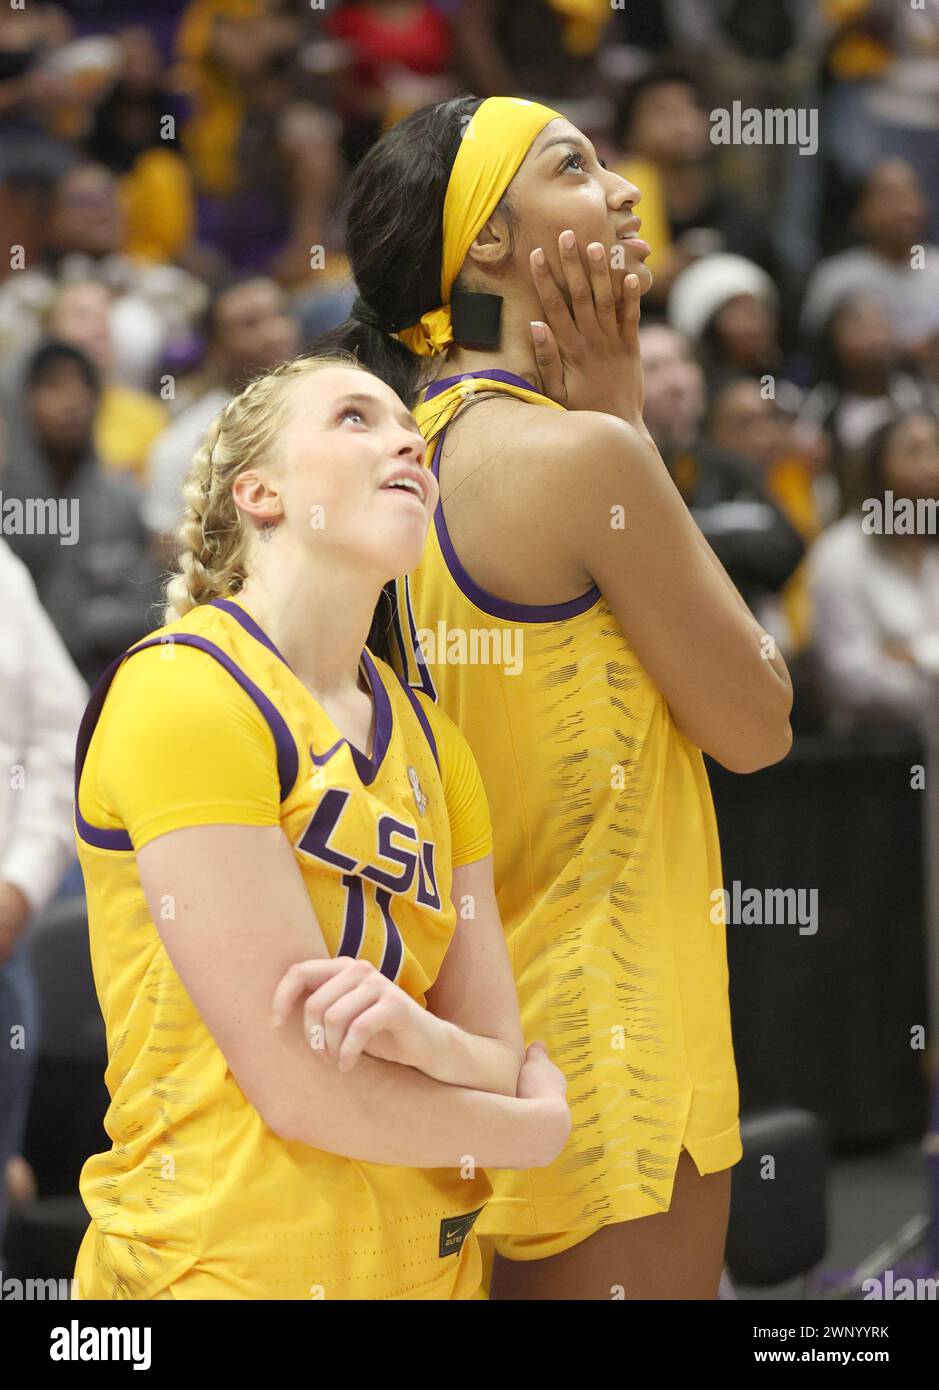 Baton Rouge, USA. 03rd Mar, 2024. LSU Lady Tigers guard Hailey Van Lith (11) and forward Angel Reese (10) both clap during a video tribute video viewing on Senior Night in the conclusion of a Southeastern Conference women's college basketball game at Pete Maravich Assembly Center in Baton Rouge, Louisiana on Sunday, March 3, 2023. Both Van Lith and Reese are featured in the video (Photo by Peter G. Forest/Sipa USA) Credit: Sipa USA/Alamy Live News Stock Photo